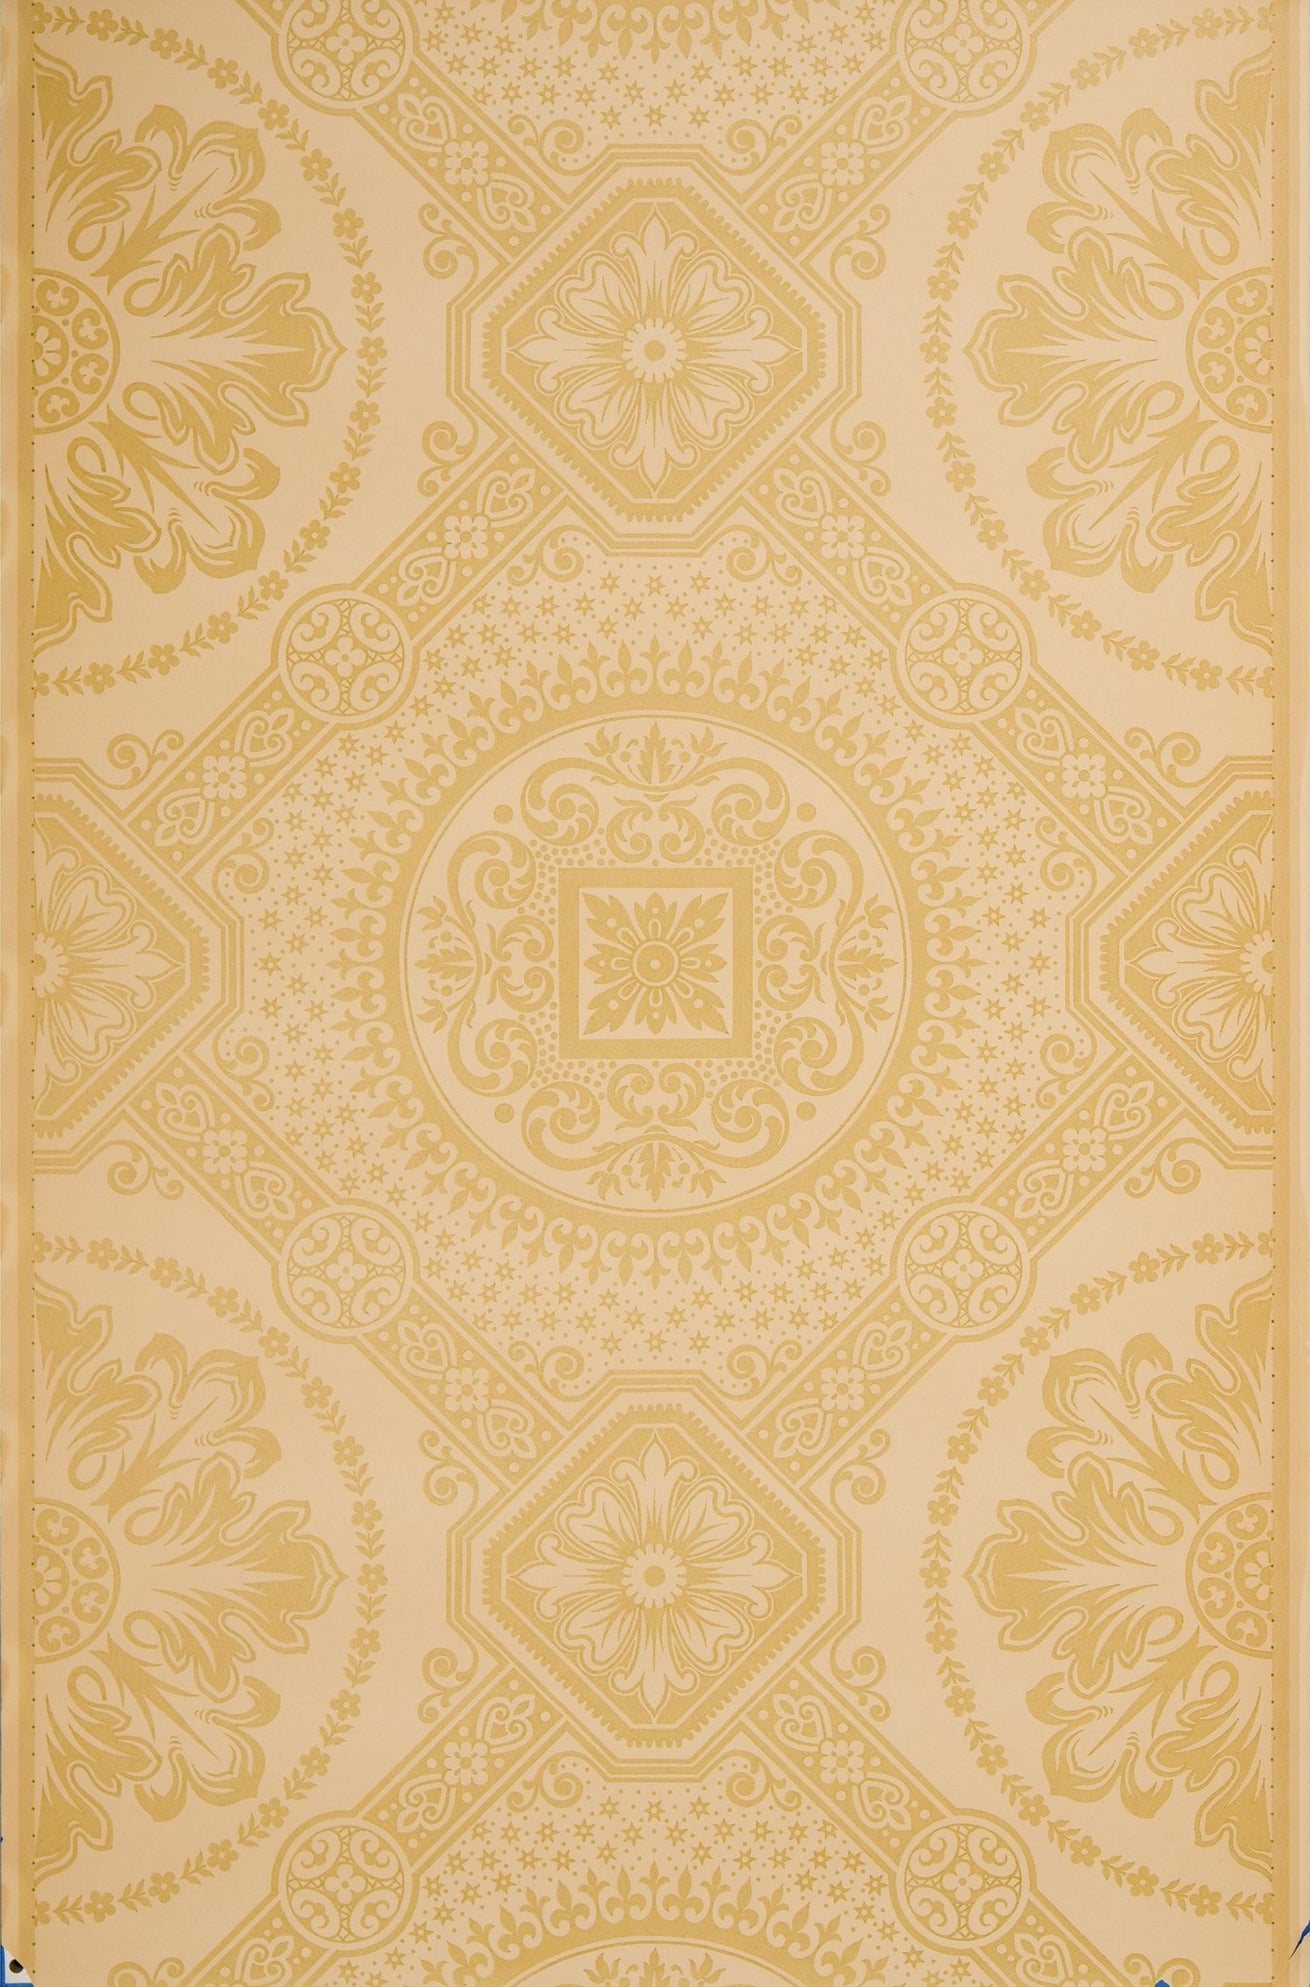 Large-Scale Grid with Foliate Circles - Antique Wallpaper Remnant